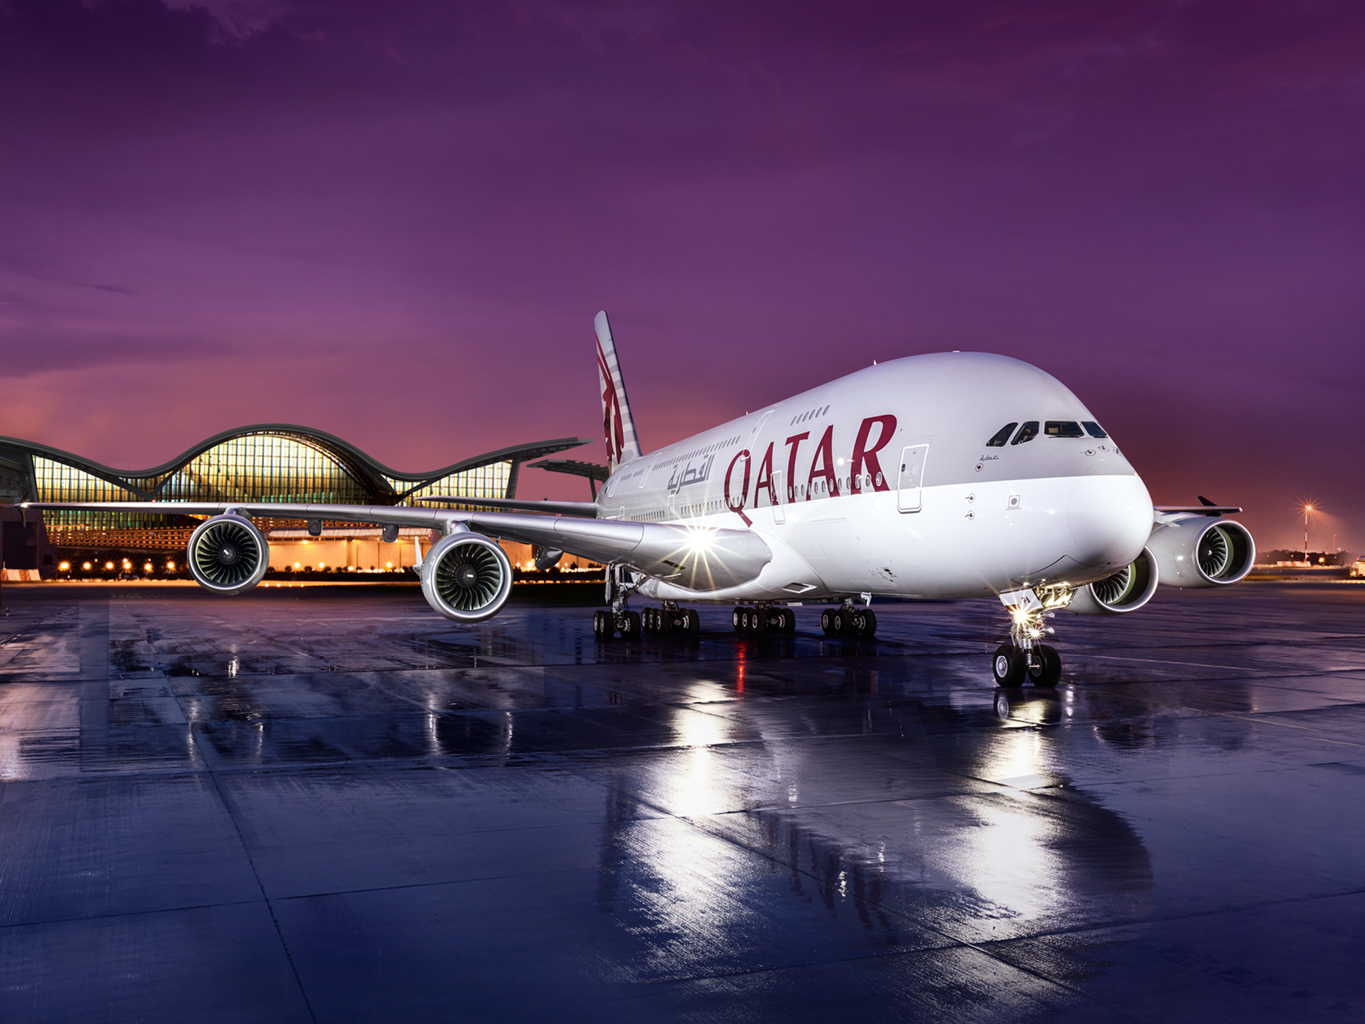 Qatar plans to launch foreign-owned Airlines in IndiaRemove term: Qatar Airlines in India Qatar Airlines in IndiaRemove term: Qatar Airlines Qatar AirlinesRemove term: Qatar Airways Qatar AirwaysRemove term: Qatar Airways in india Qatar Airways in indiaRemove term: Qatar Domestic planes Qatar Domestic planesRemove term: foreign owned planes in India foreign owned planes in IndiaRemove term: Foreign Direct Inestments Foreign Direct InestmentsRemove term: FDI's FDI'sRemove term: FDI's in Civil Aviation FDI's in Civil Aviation